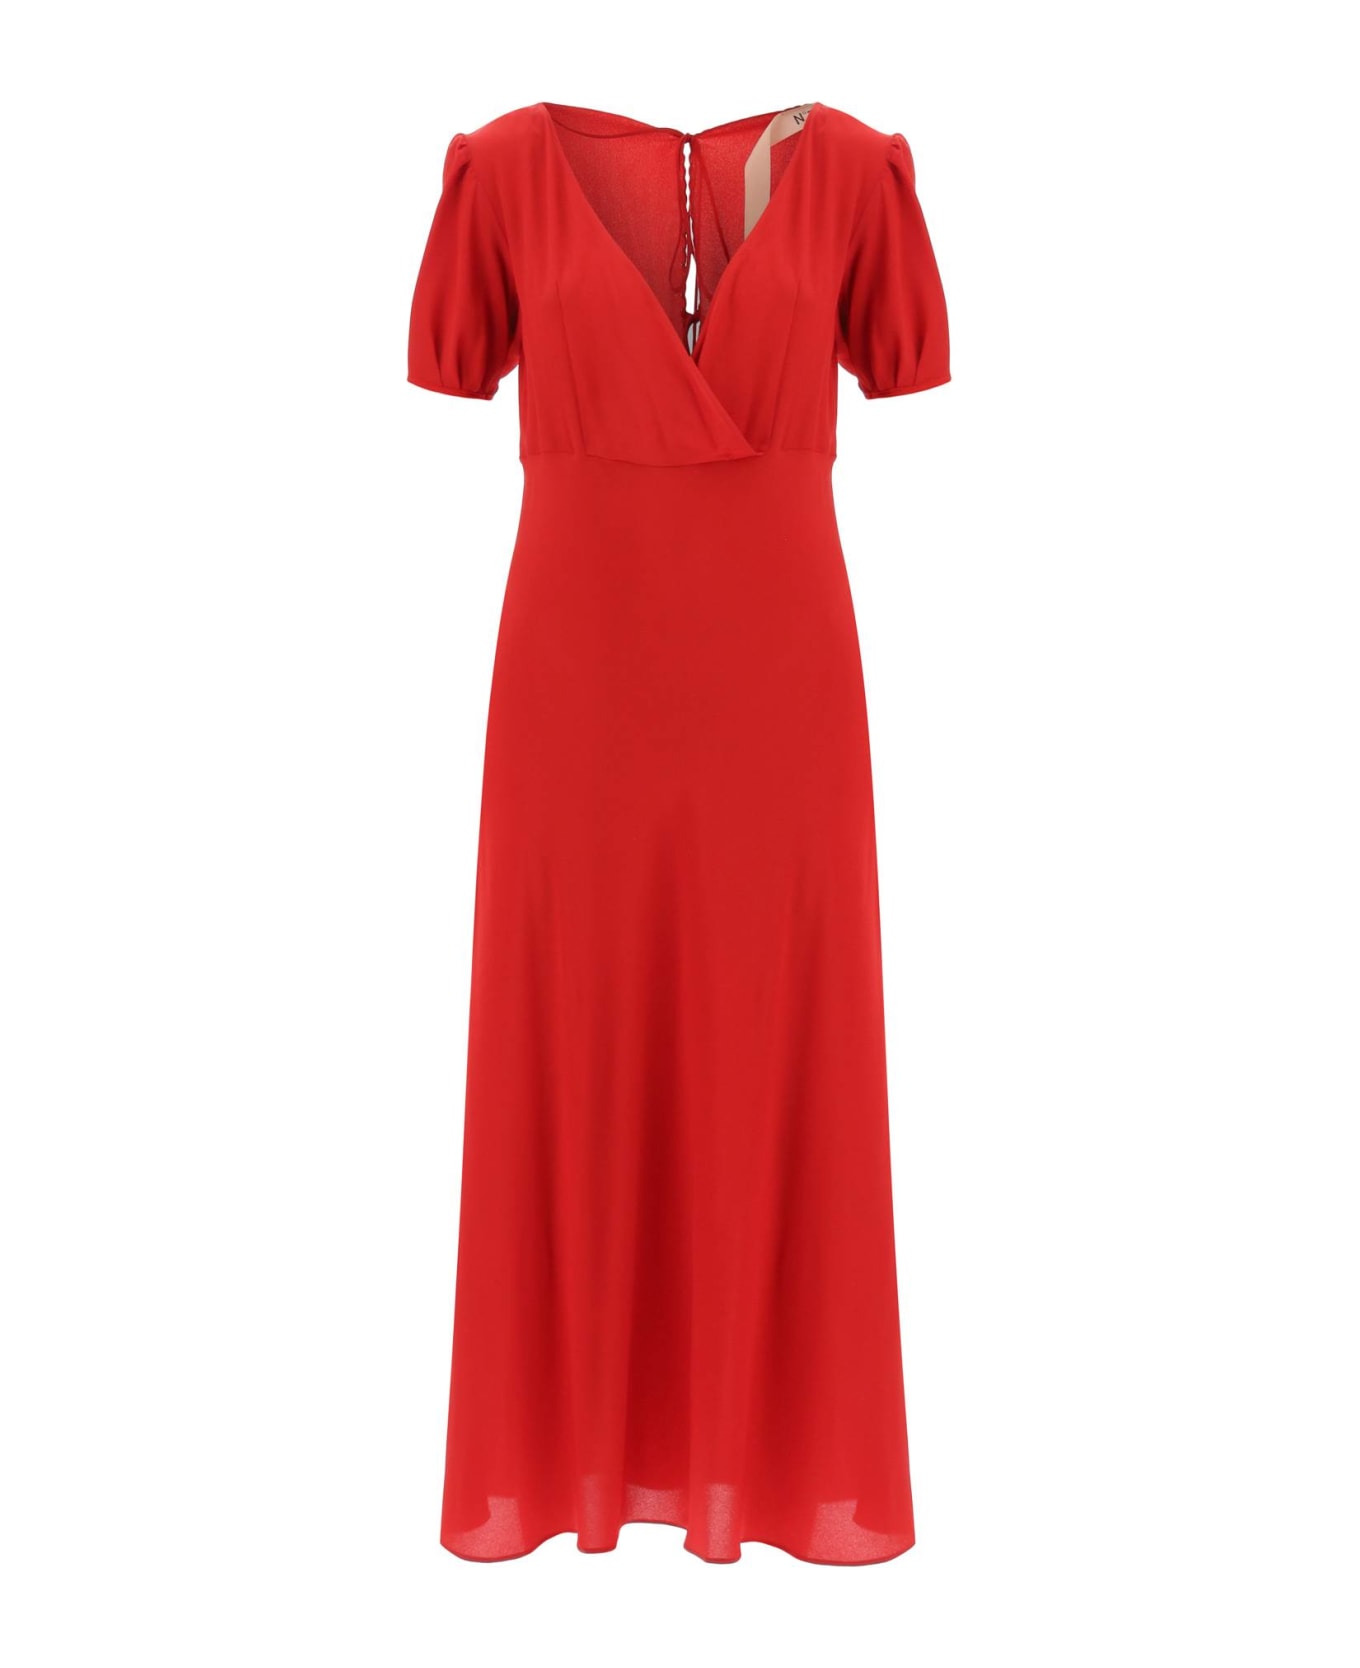 N.21 Crepe Midi Dress - ROSSO (Red)